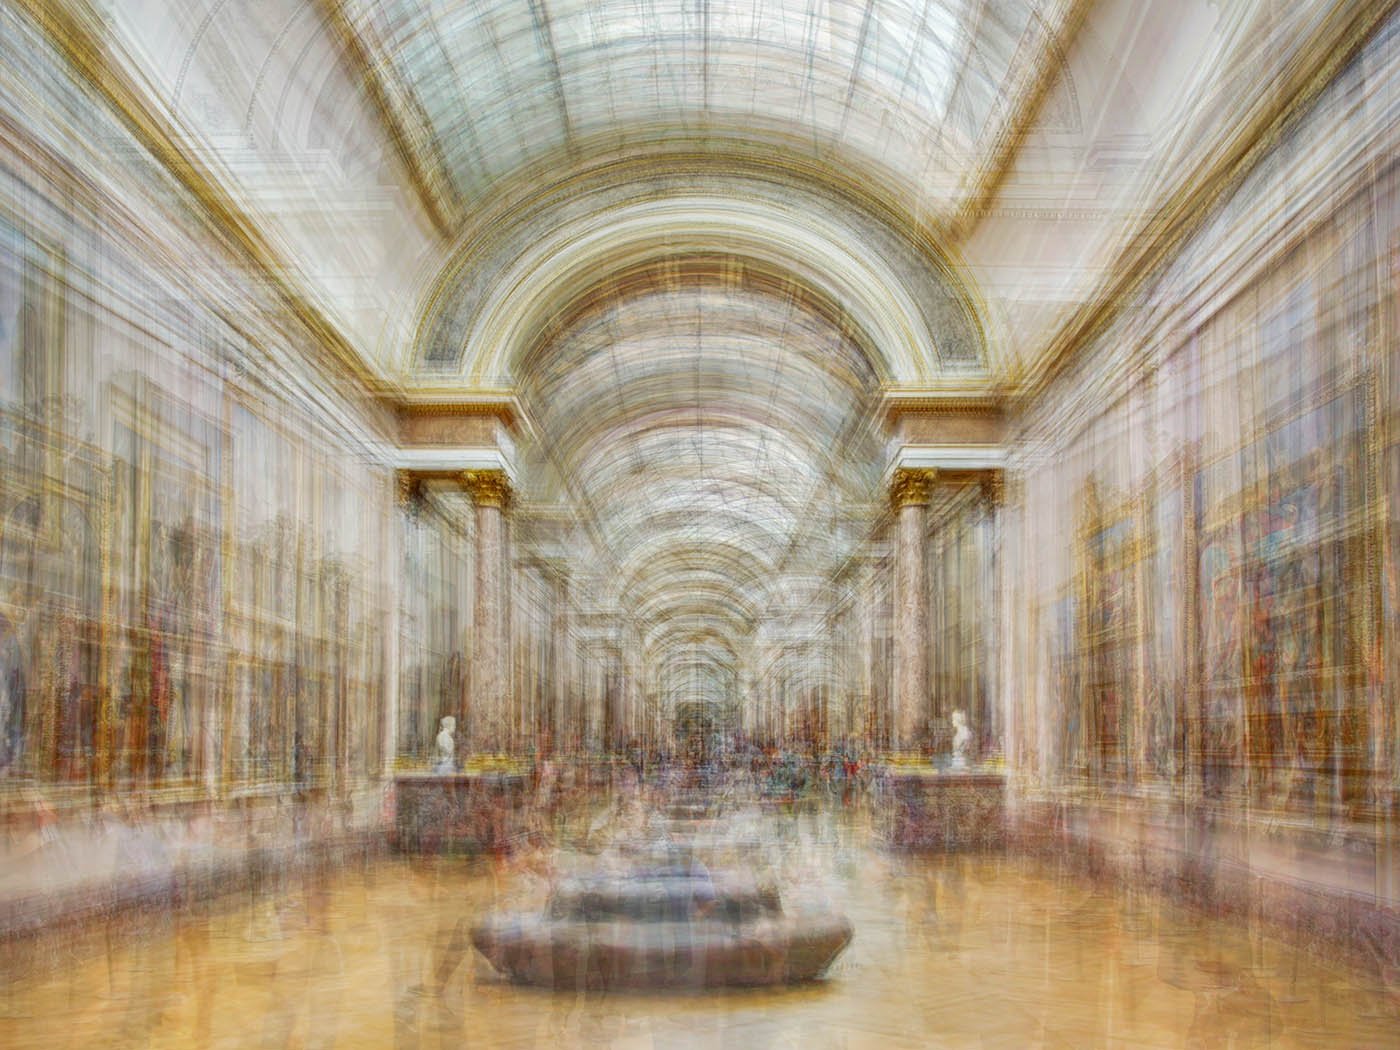 Grande Galerie, Louvre by Pep Ventosa